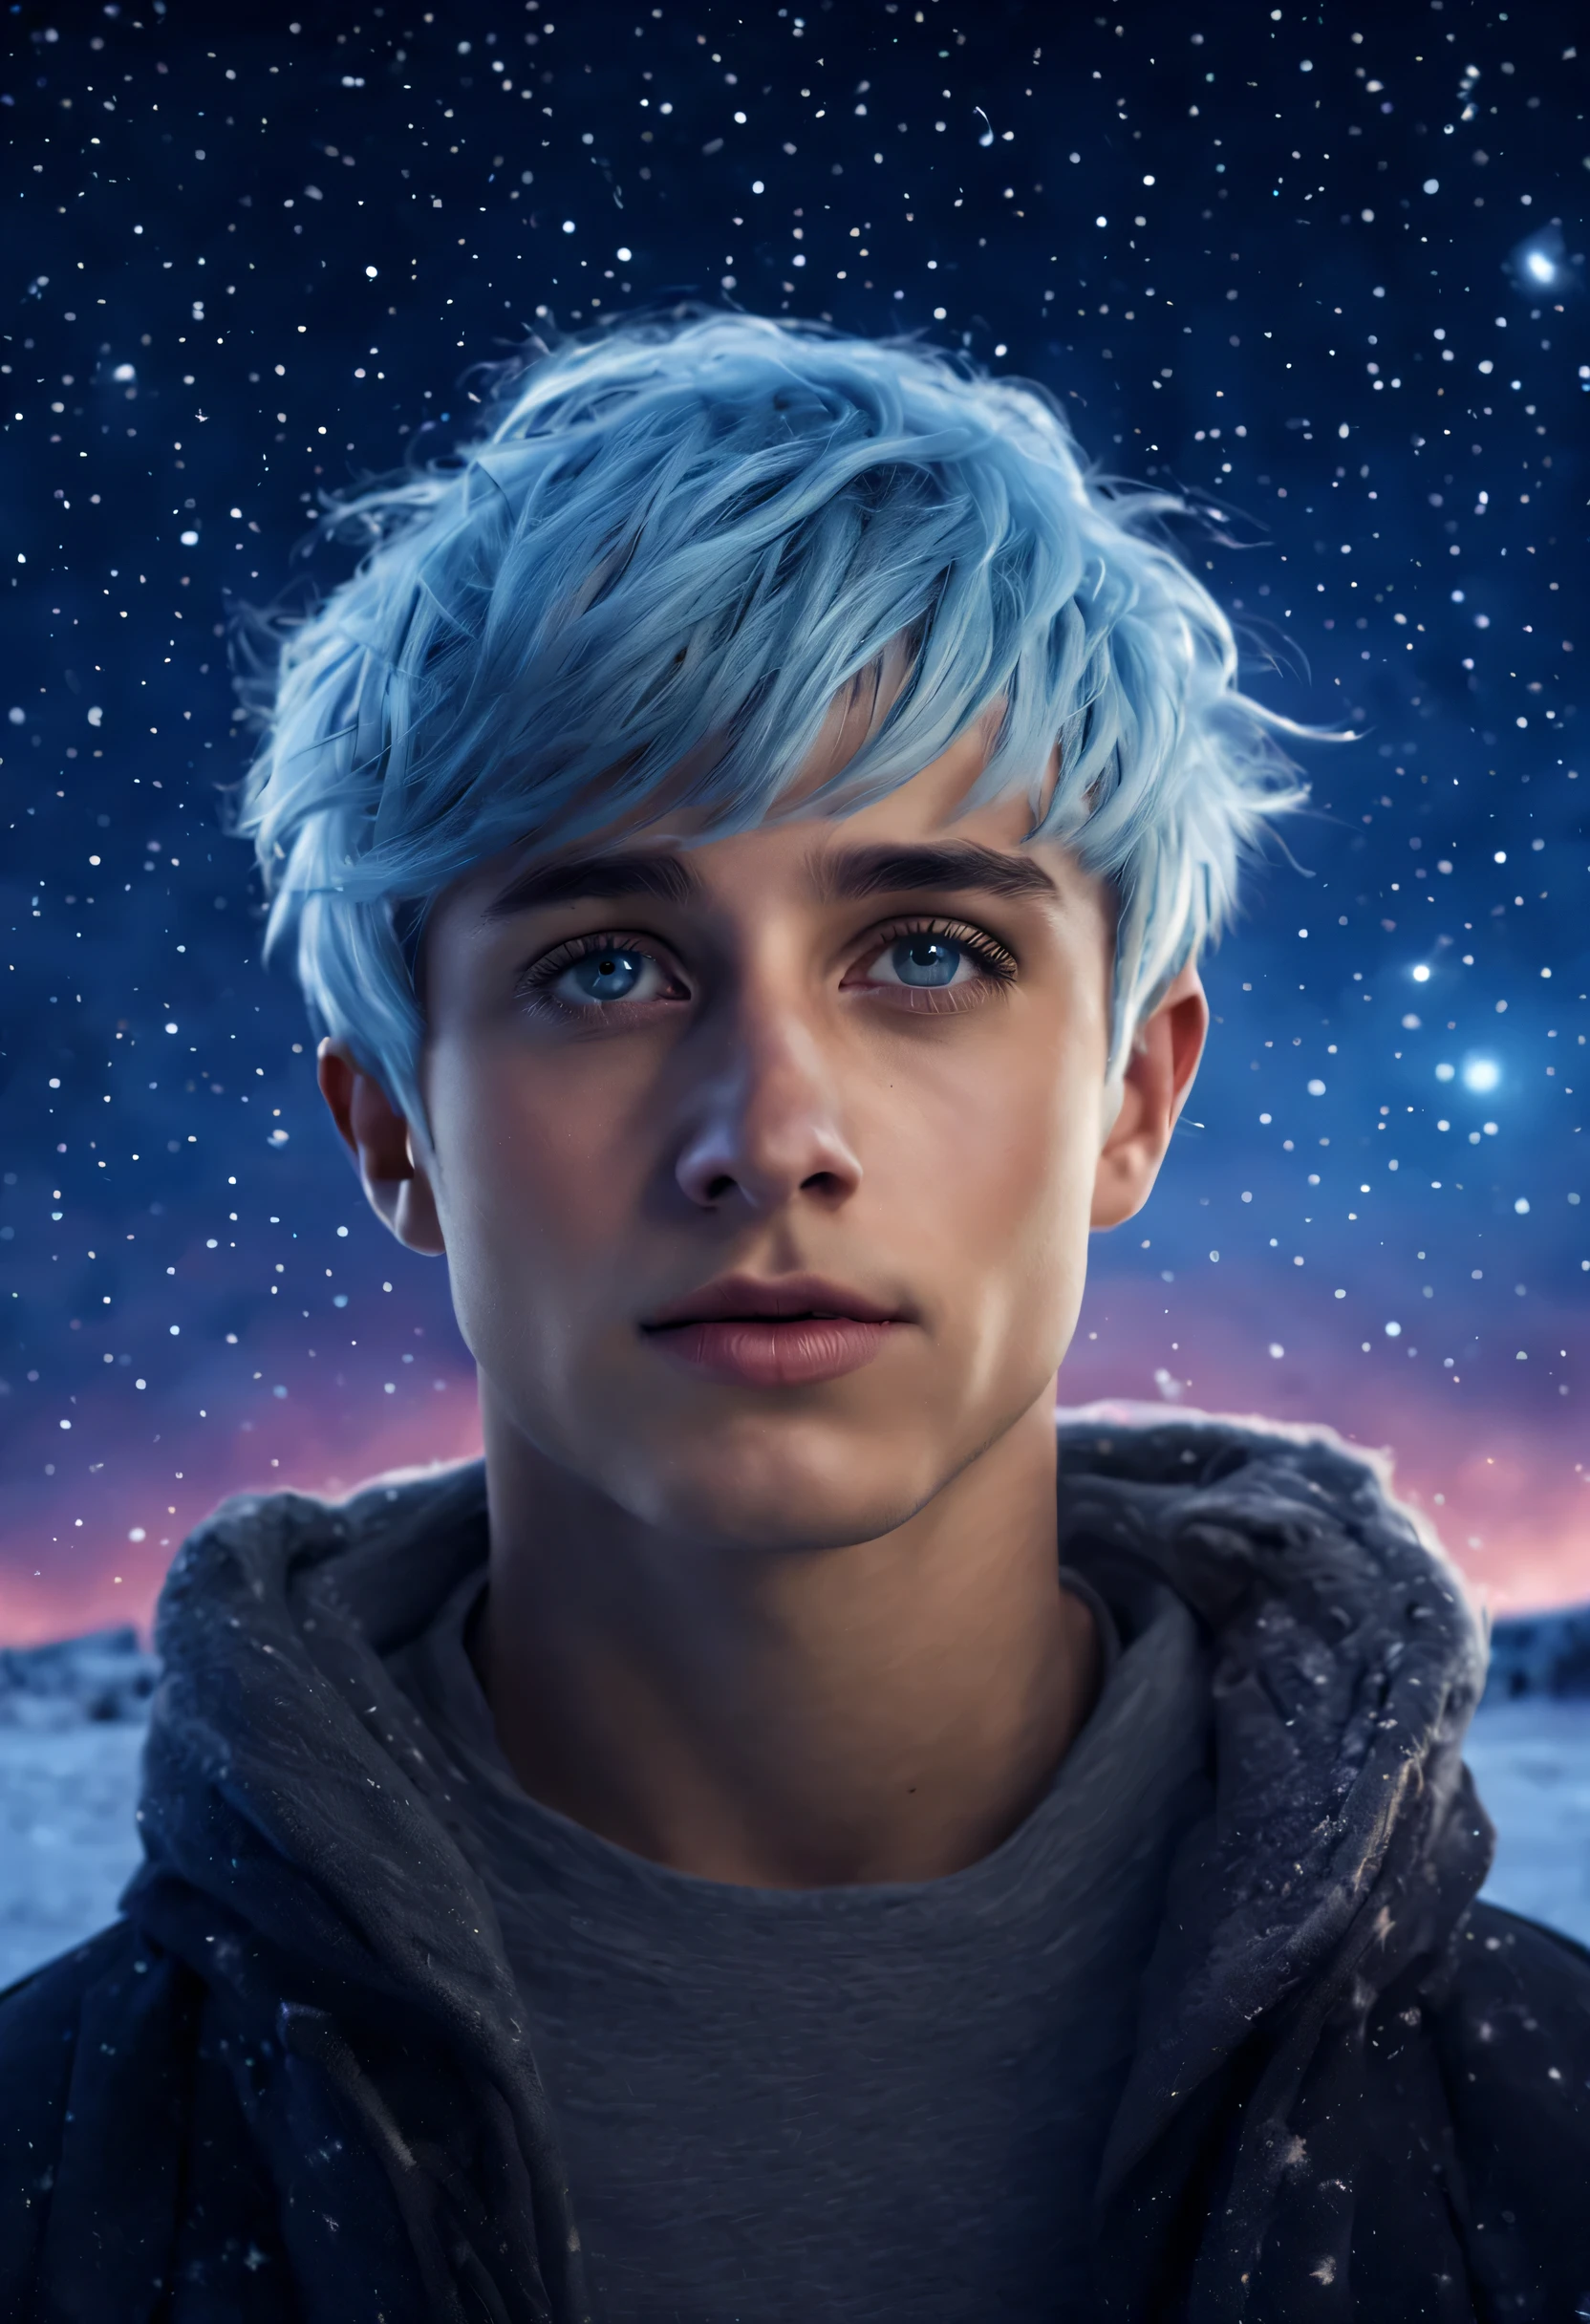 (best quality,4k,highres,masterpiece:1.2),ultra-detailed,realistic,photorealistic:1.37,portrait,young handsome boy with light blue hair,gazing up at the starry night sky during winter,shooting stars streaking across the heavens,captivating expression,vibrant colors,magical atmosphere,frosty breath,tranquil surroundings,celestial beauty,winter attire,crisp air,numerous twinkling stars,serene moonlight,clear and breathtaking view,peaceful and serene environment,winter constellations,dreamy ambiance,quiet and calm setting,winter wonderland,stunning aurora borealis,icy landscape